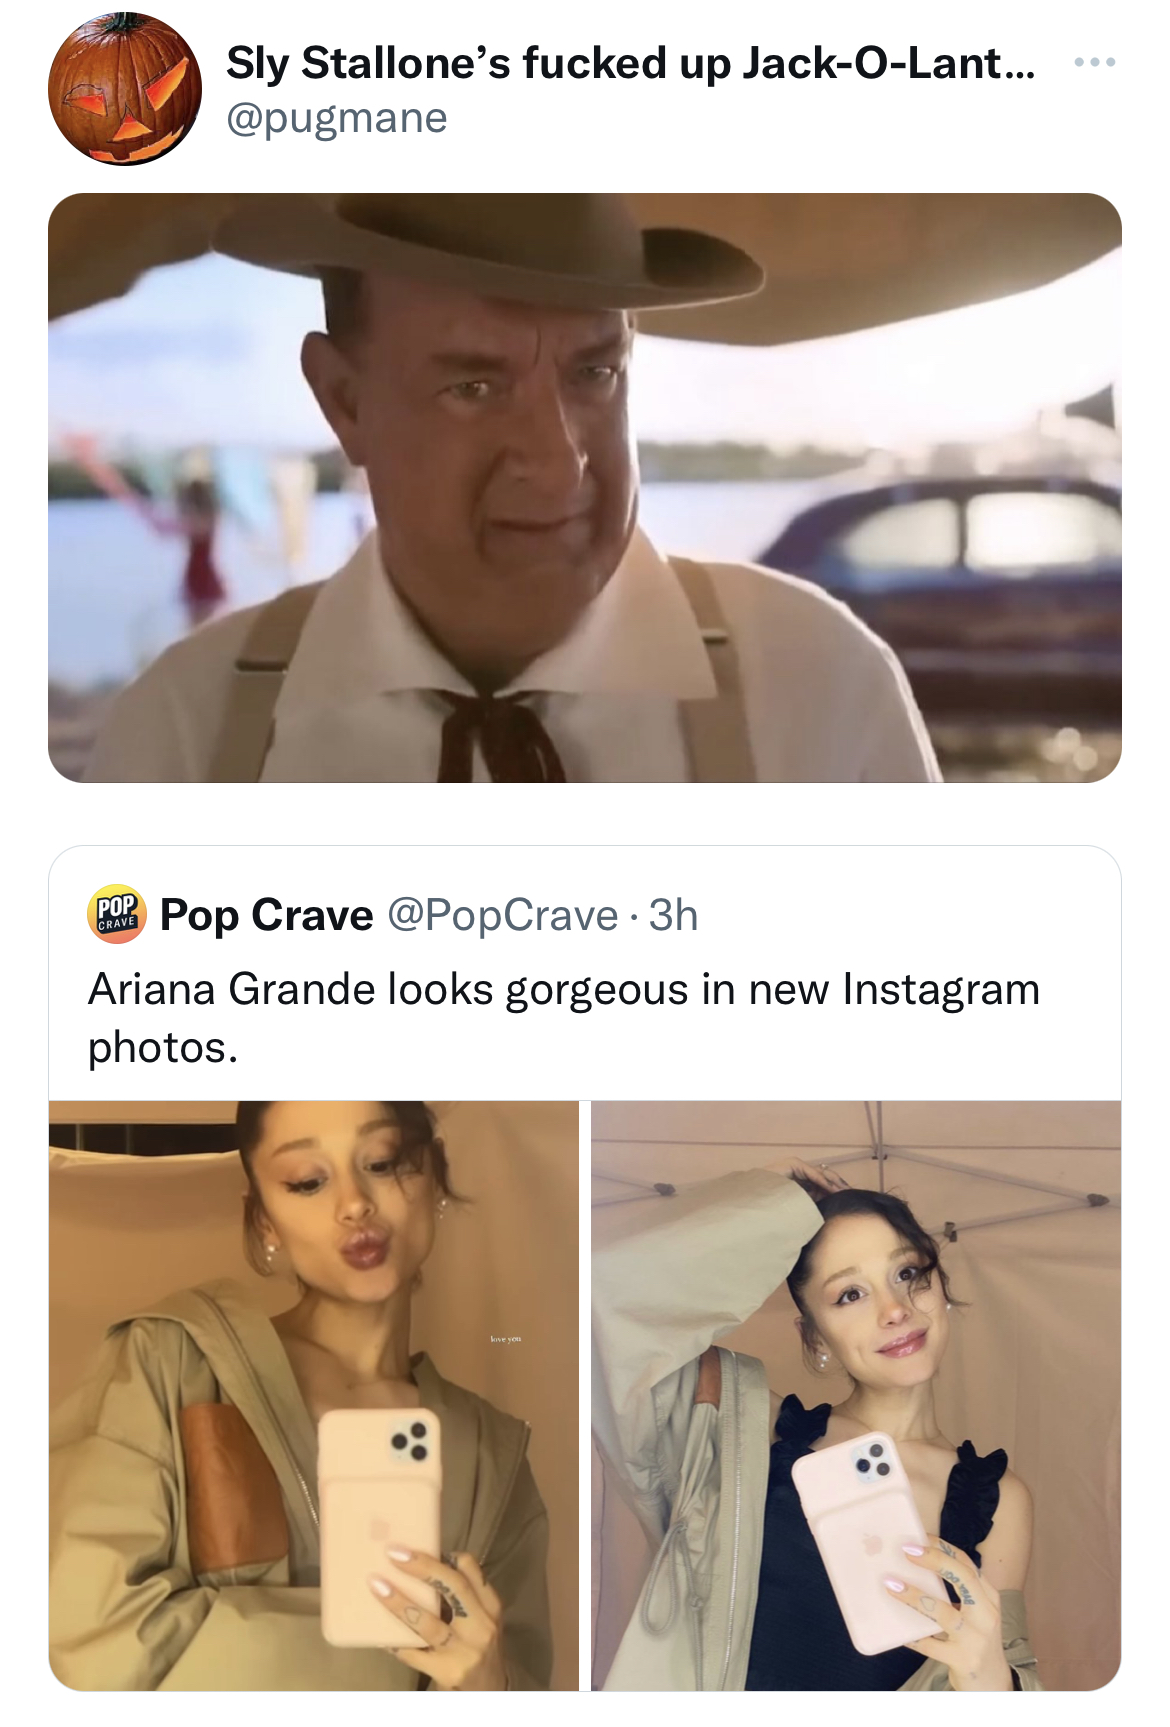 photo caption - Sly Stallone's fucked up JackOLant... Pop Crave 3h Ariana Grande looks gorgeous in new Instagram photos.